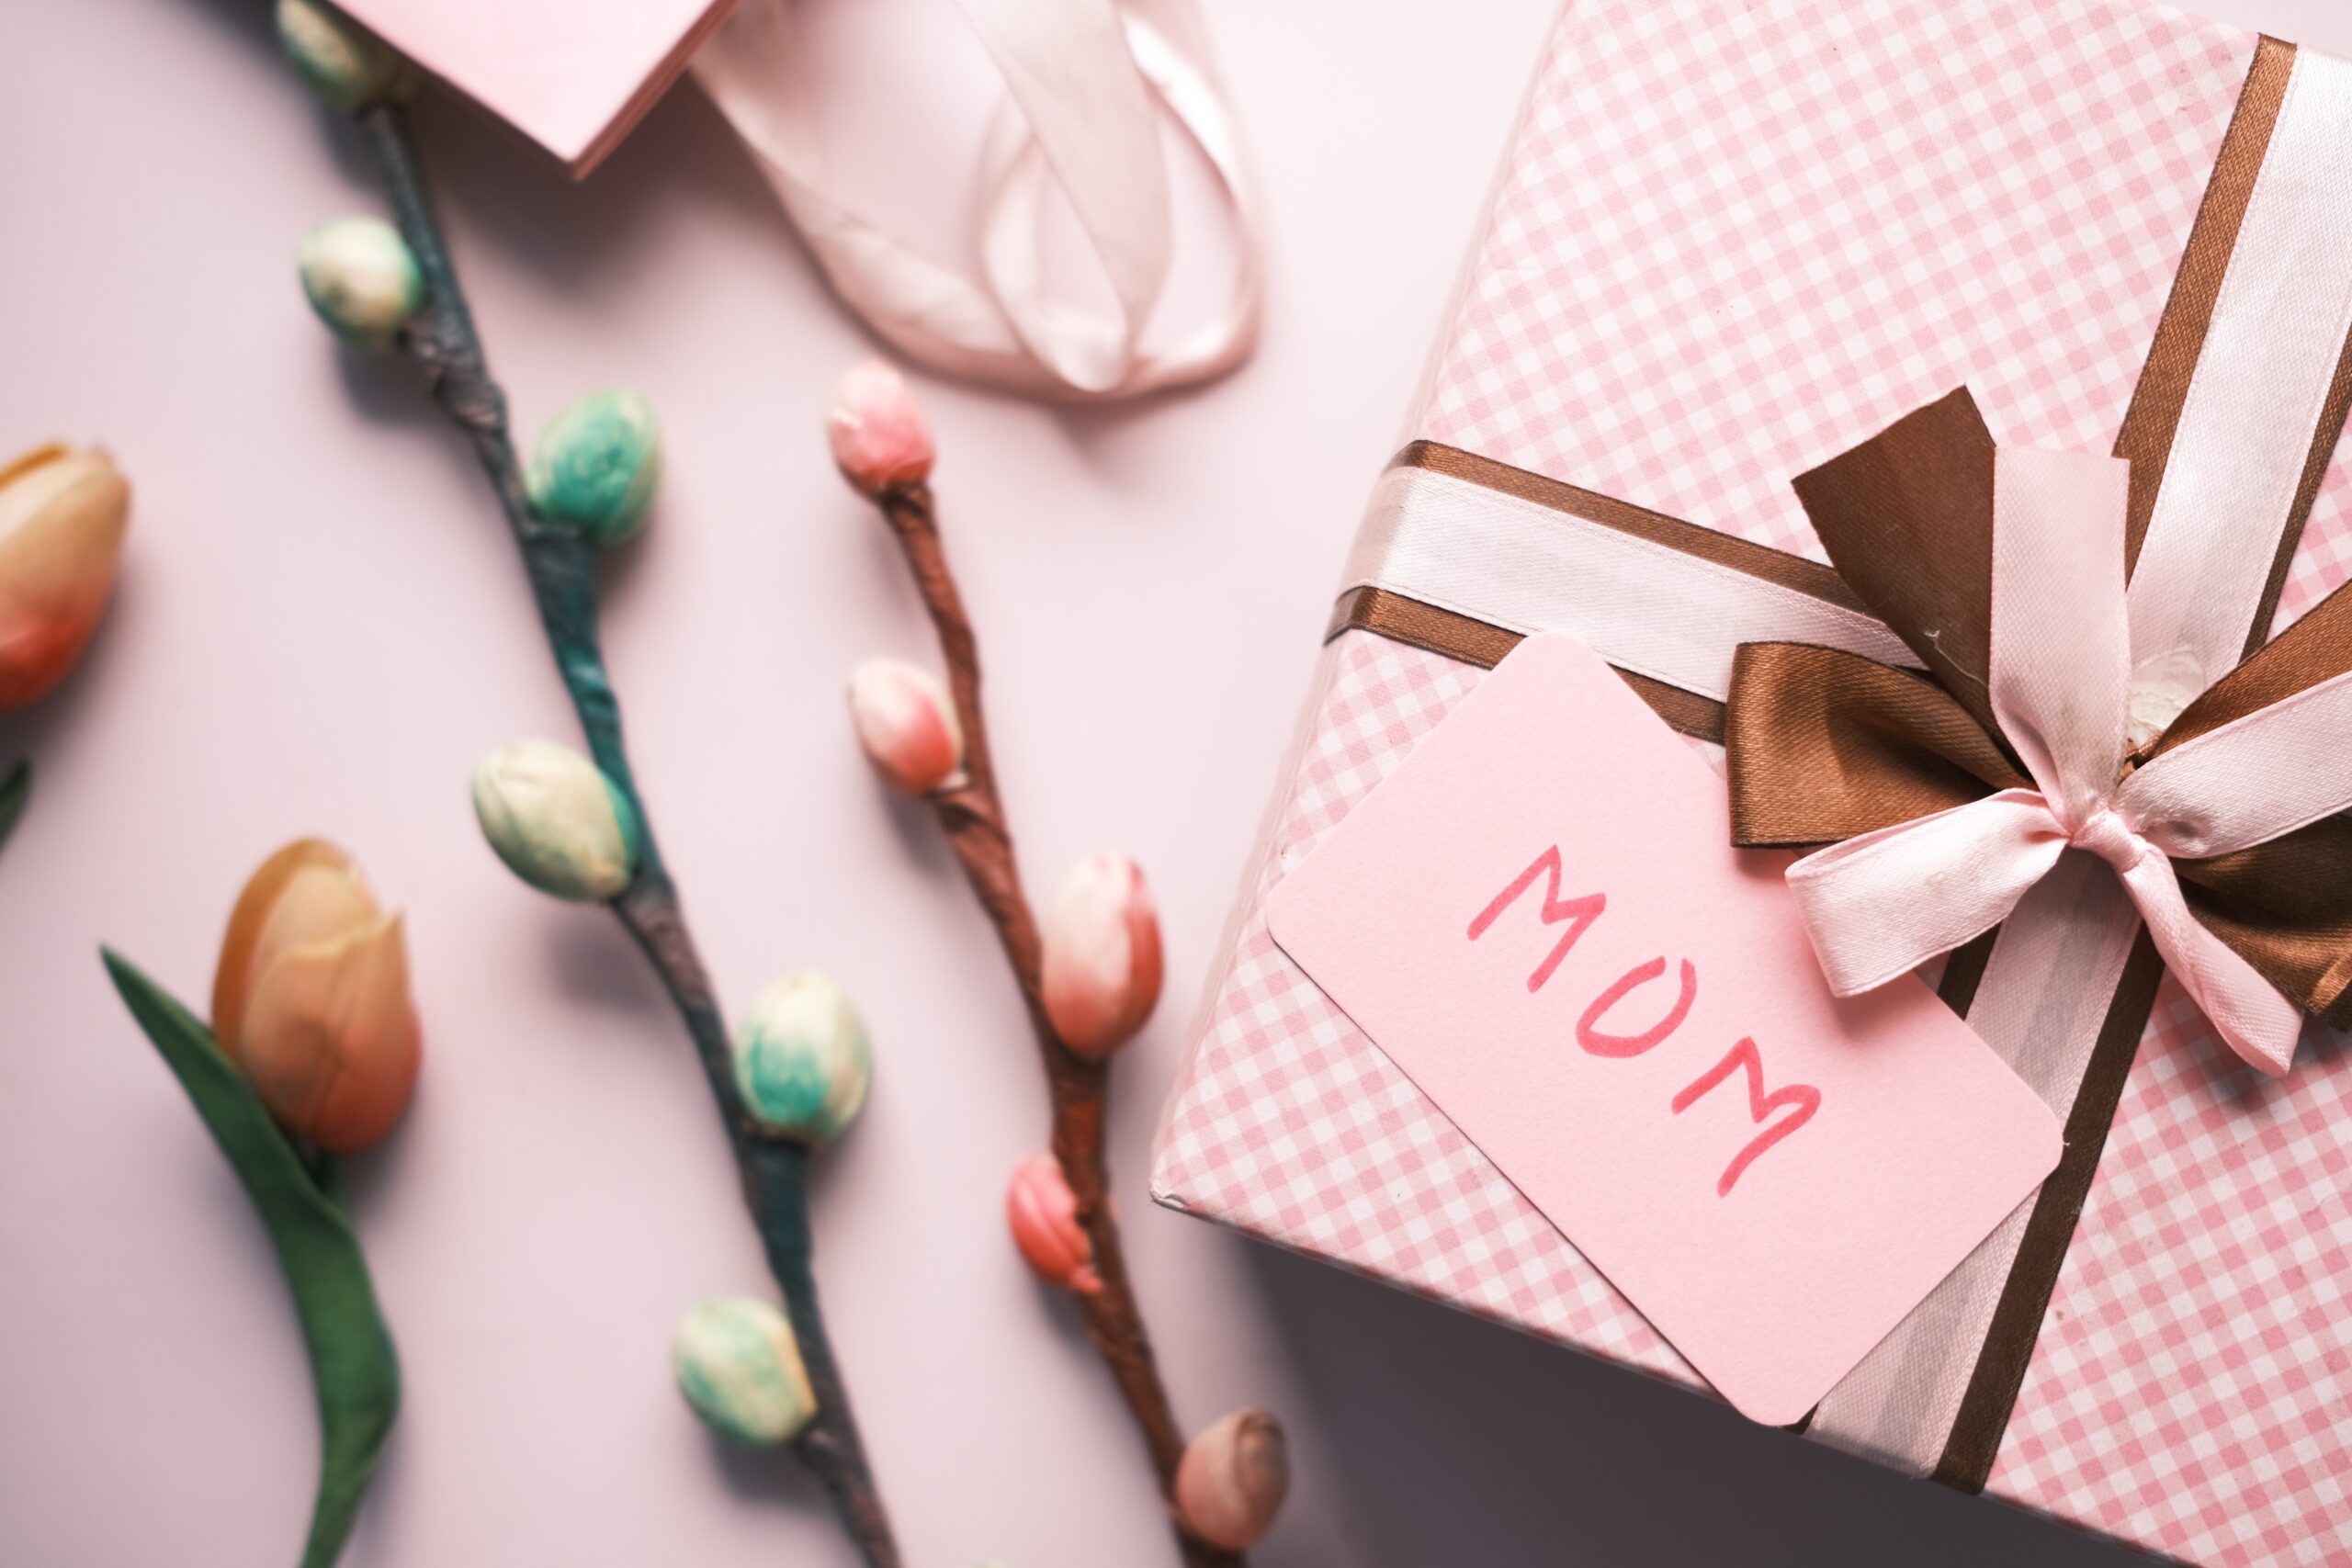 Mother's Day Gift Guide for Every Mom